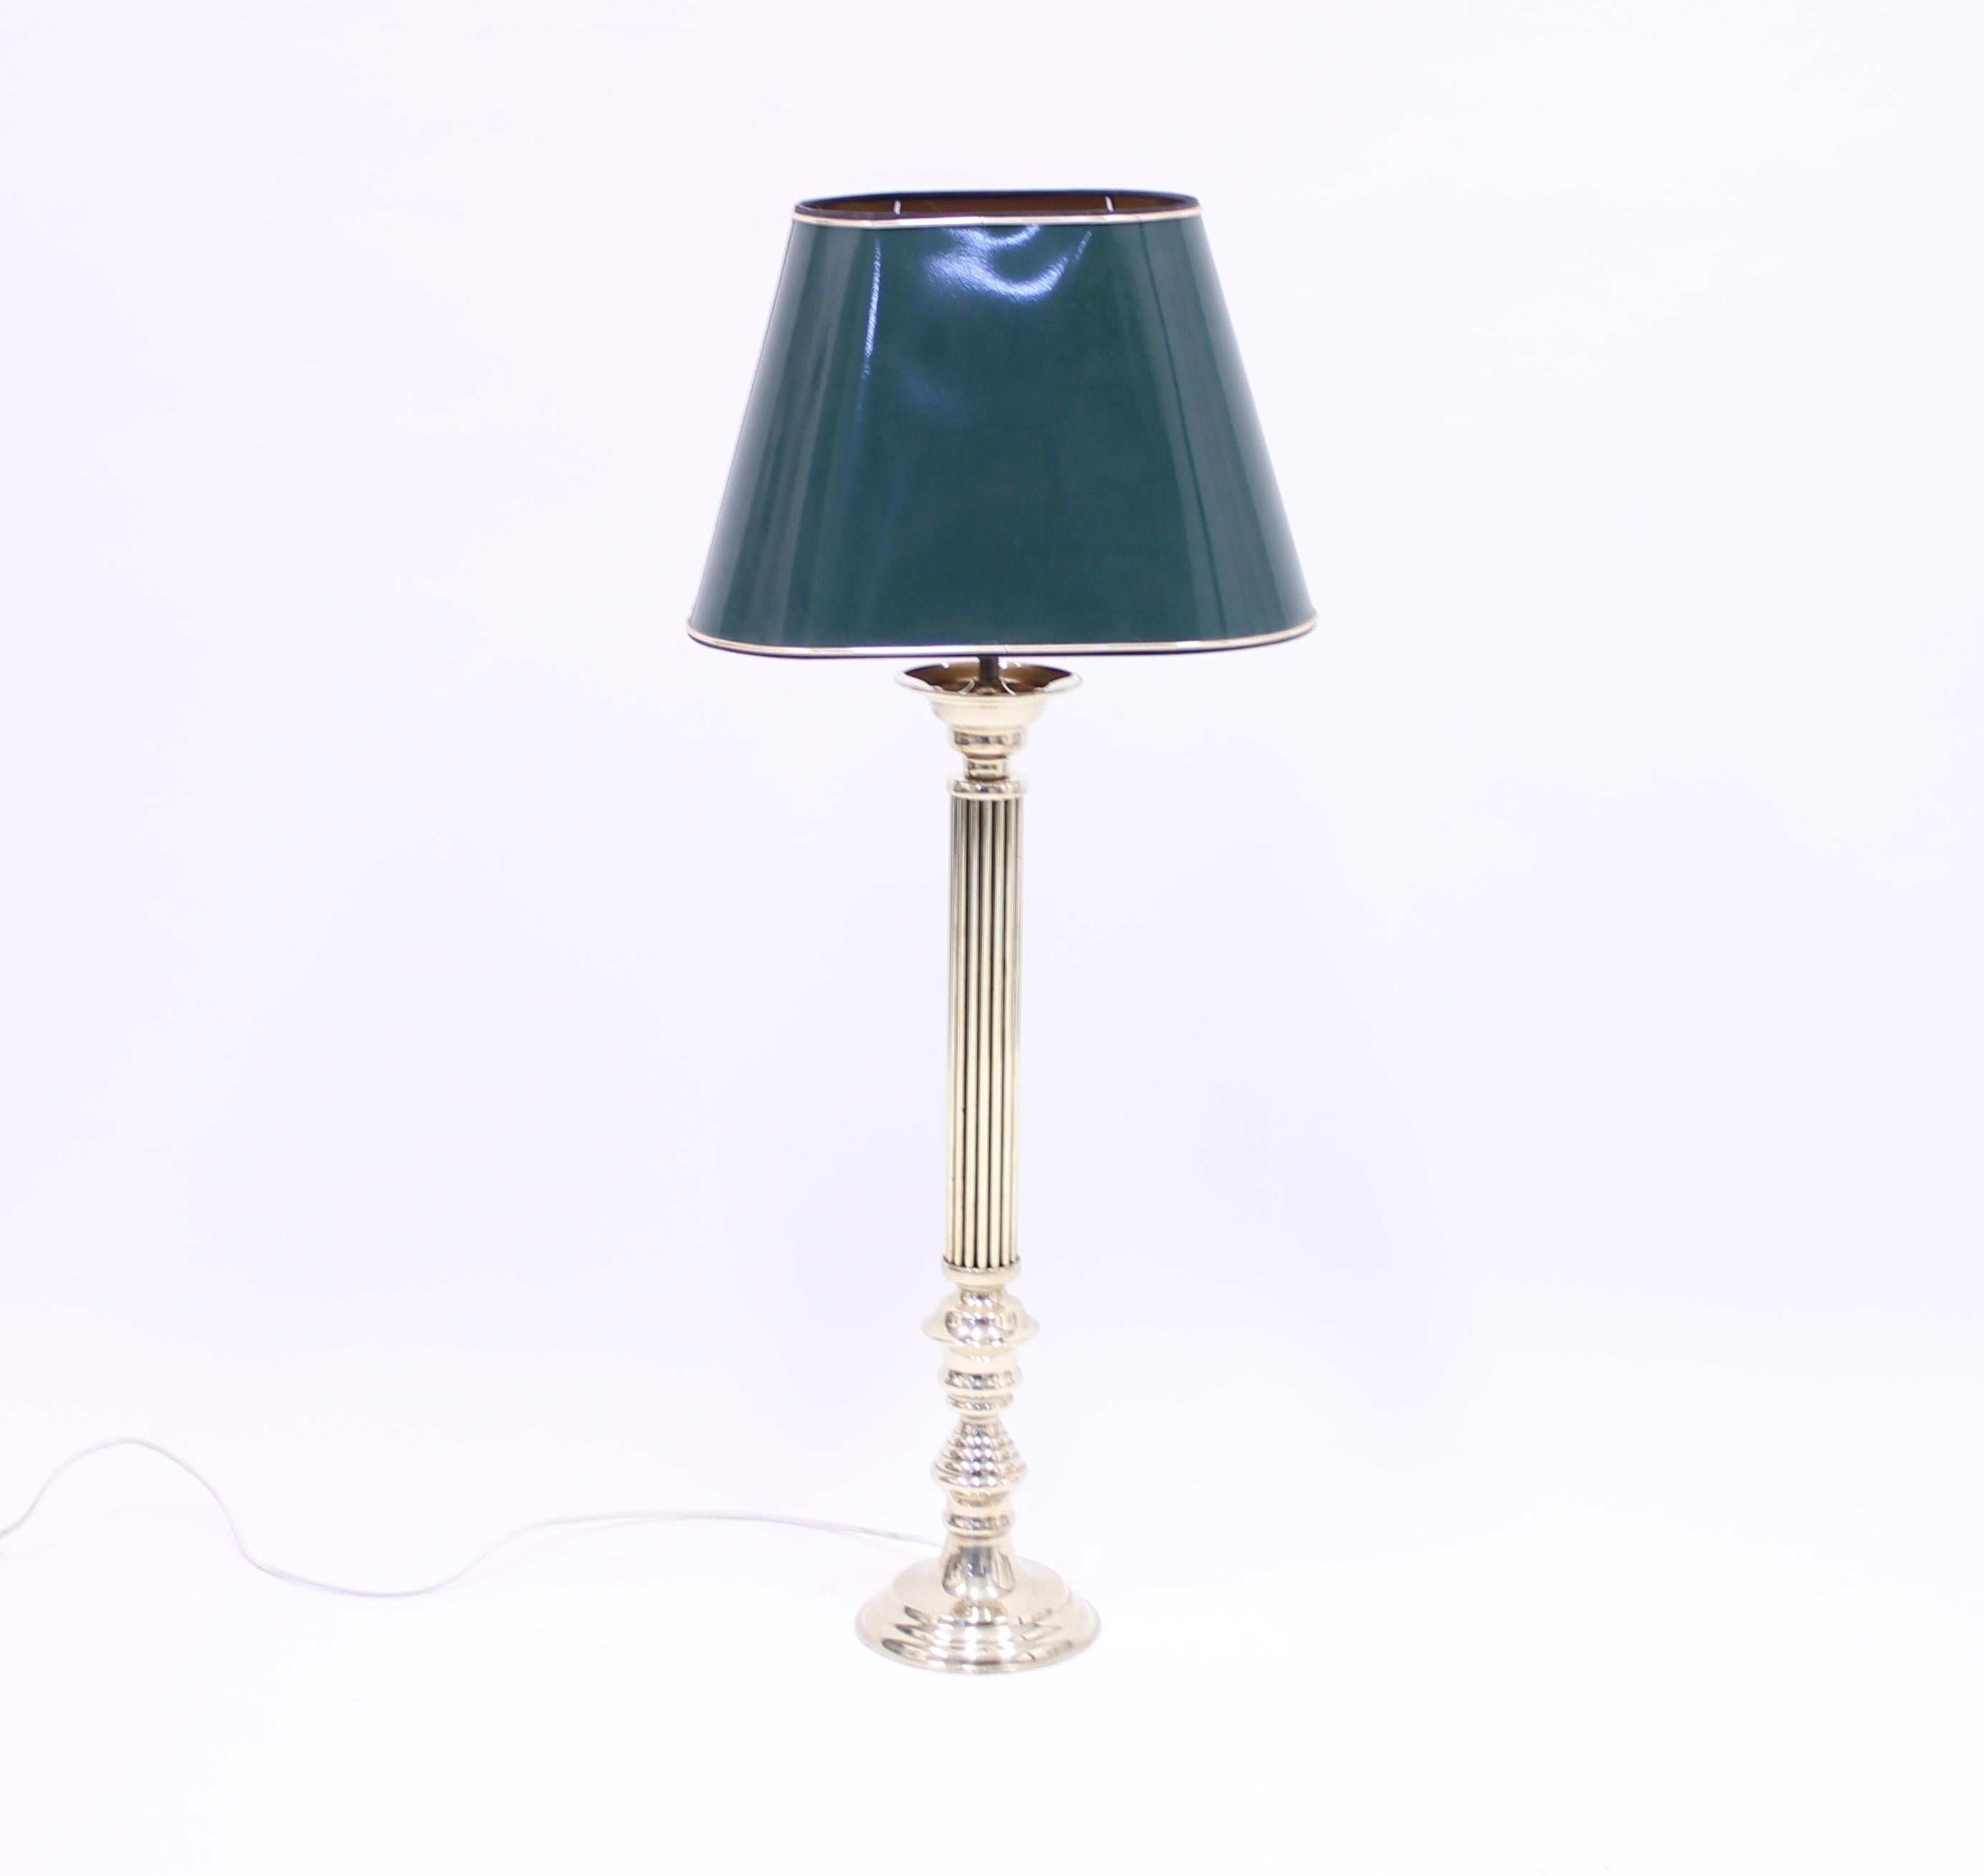 Neoclassical Revival Tall Neoclassical Brass Table Lamp with Green Lacquered Shade, 1970s